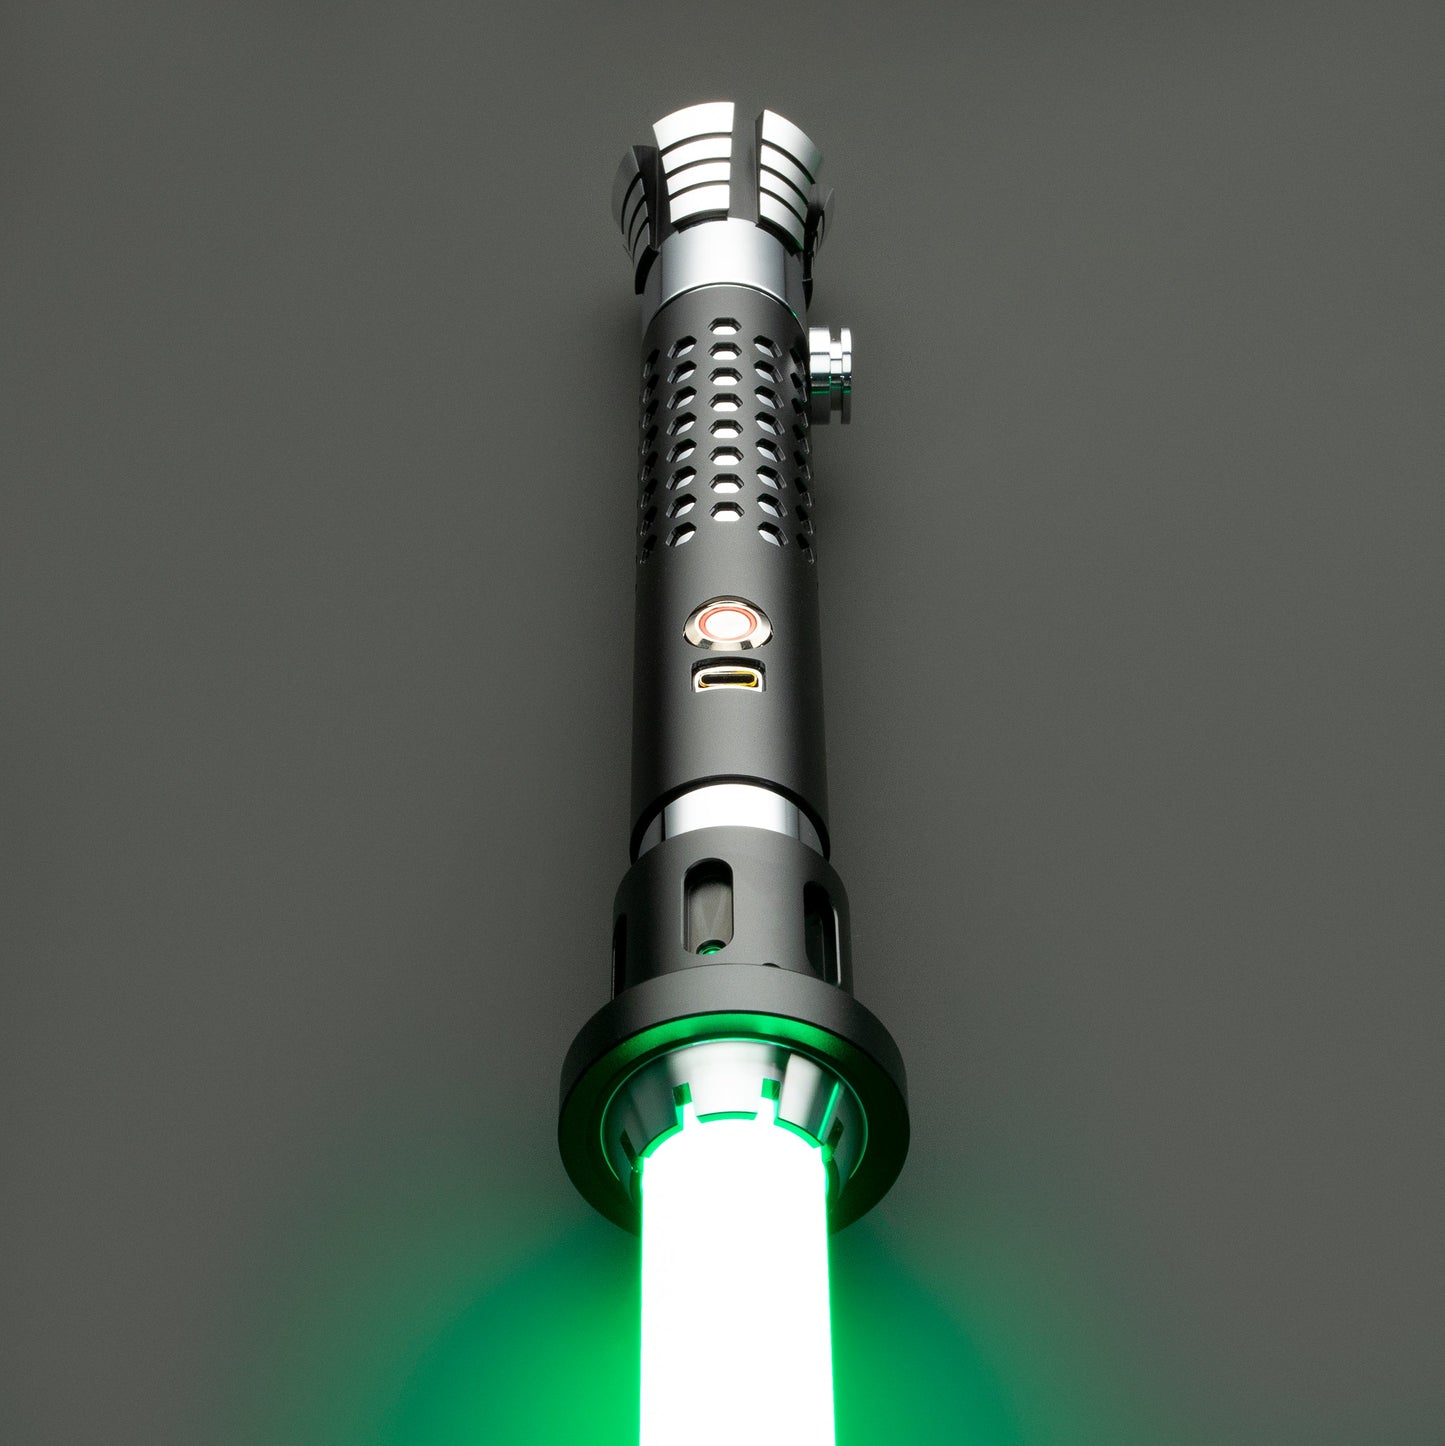 Custom THE COMB Saber by LGT Sabers